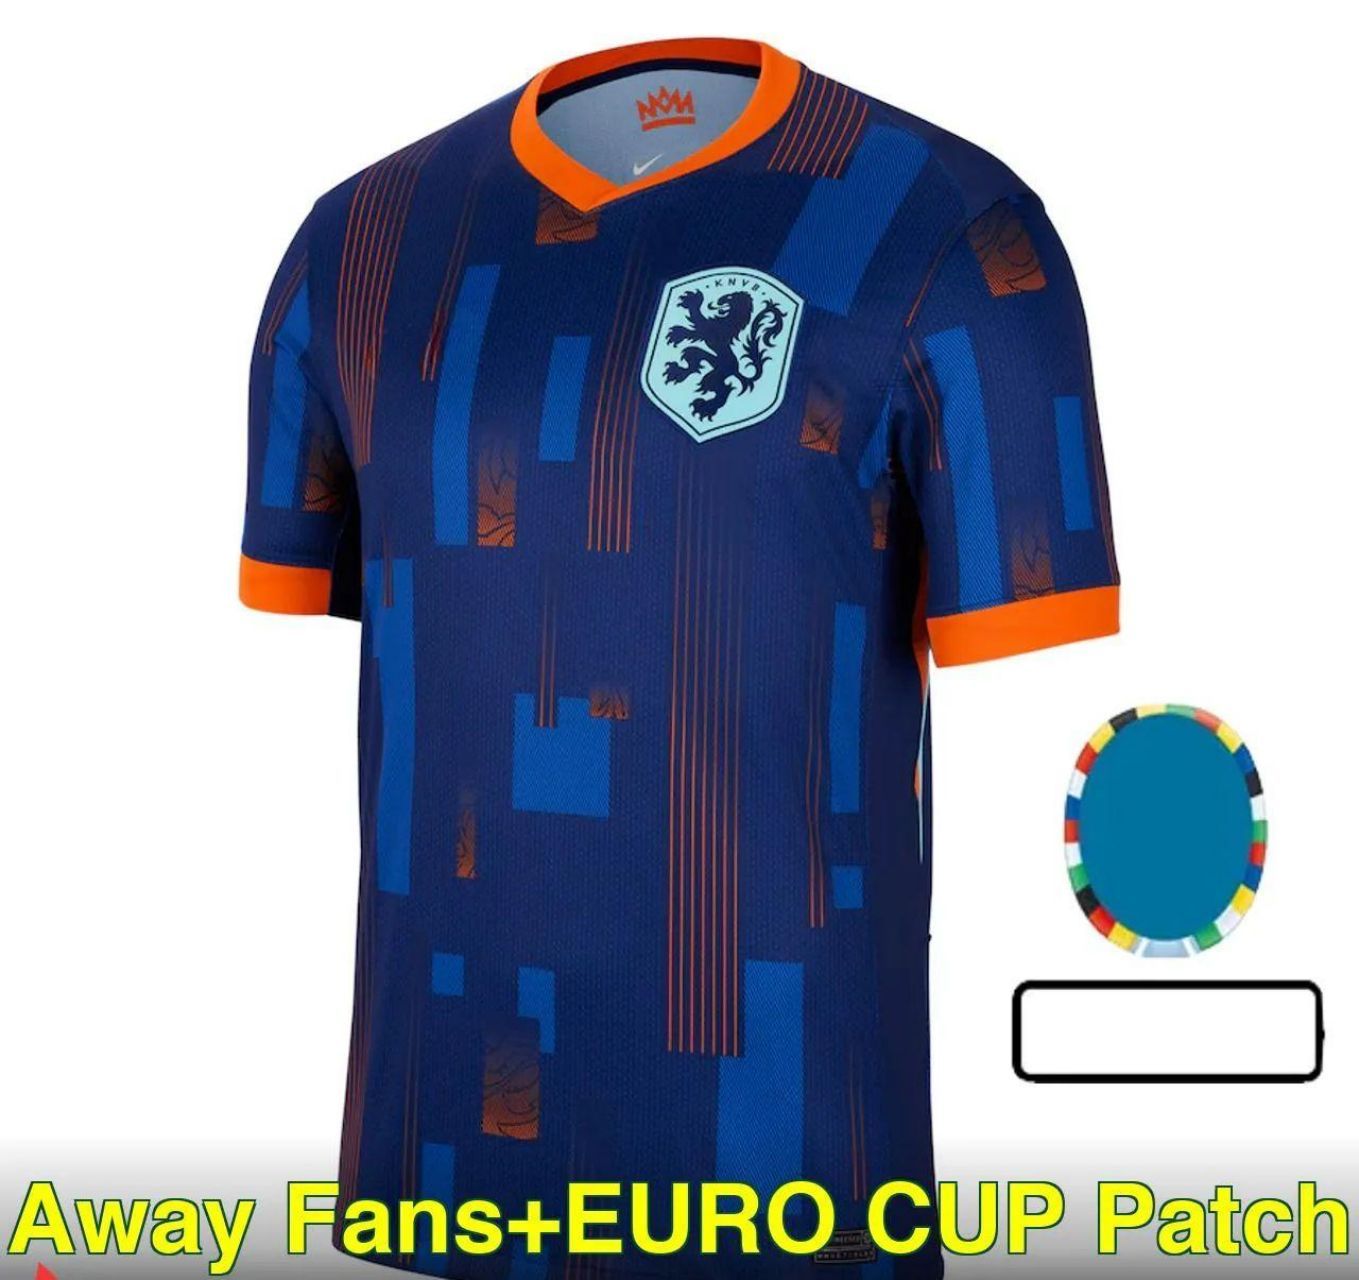 Away Fans+EURO CUP Patch